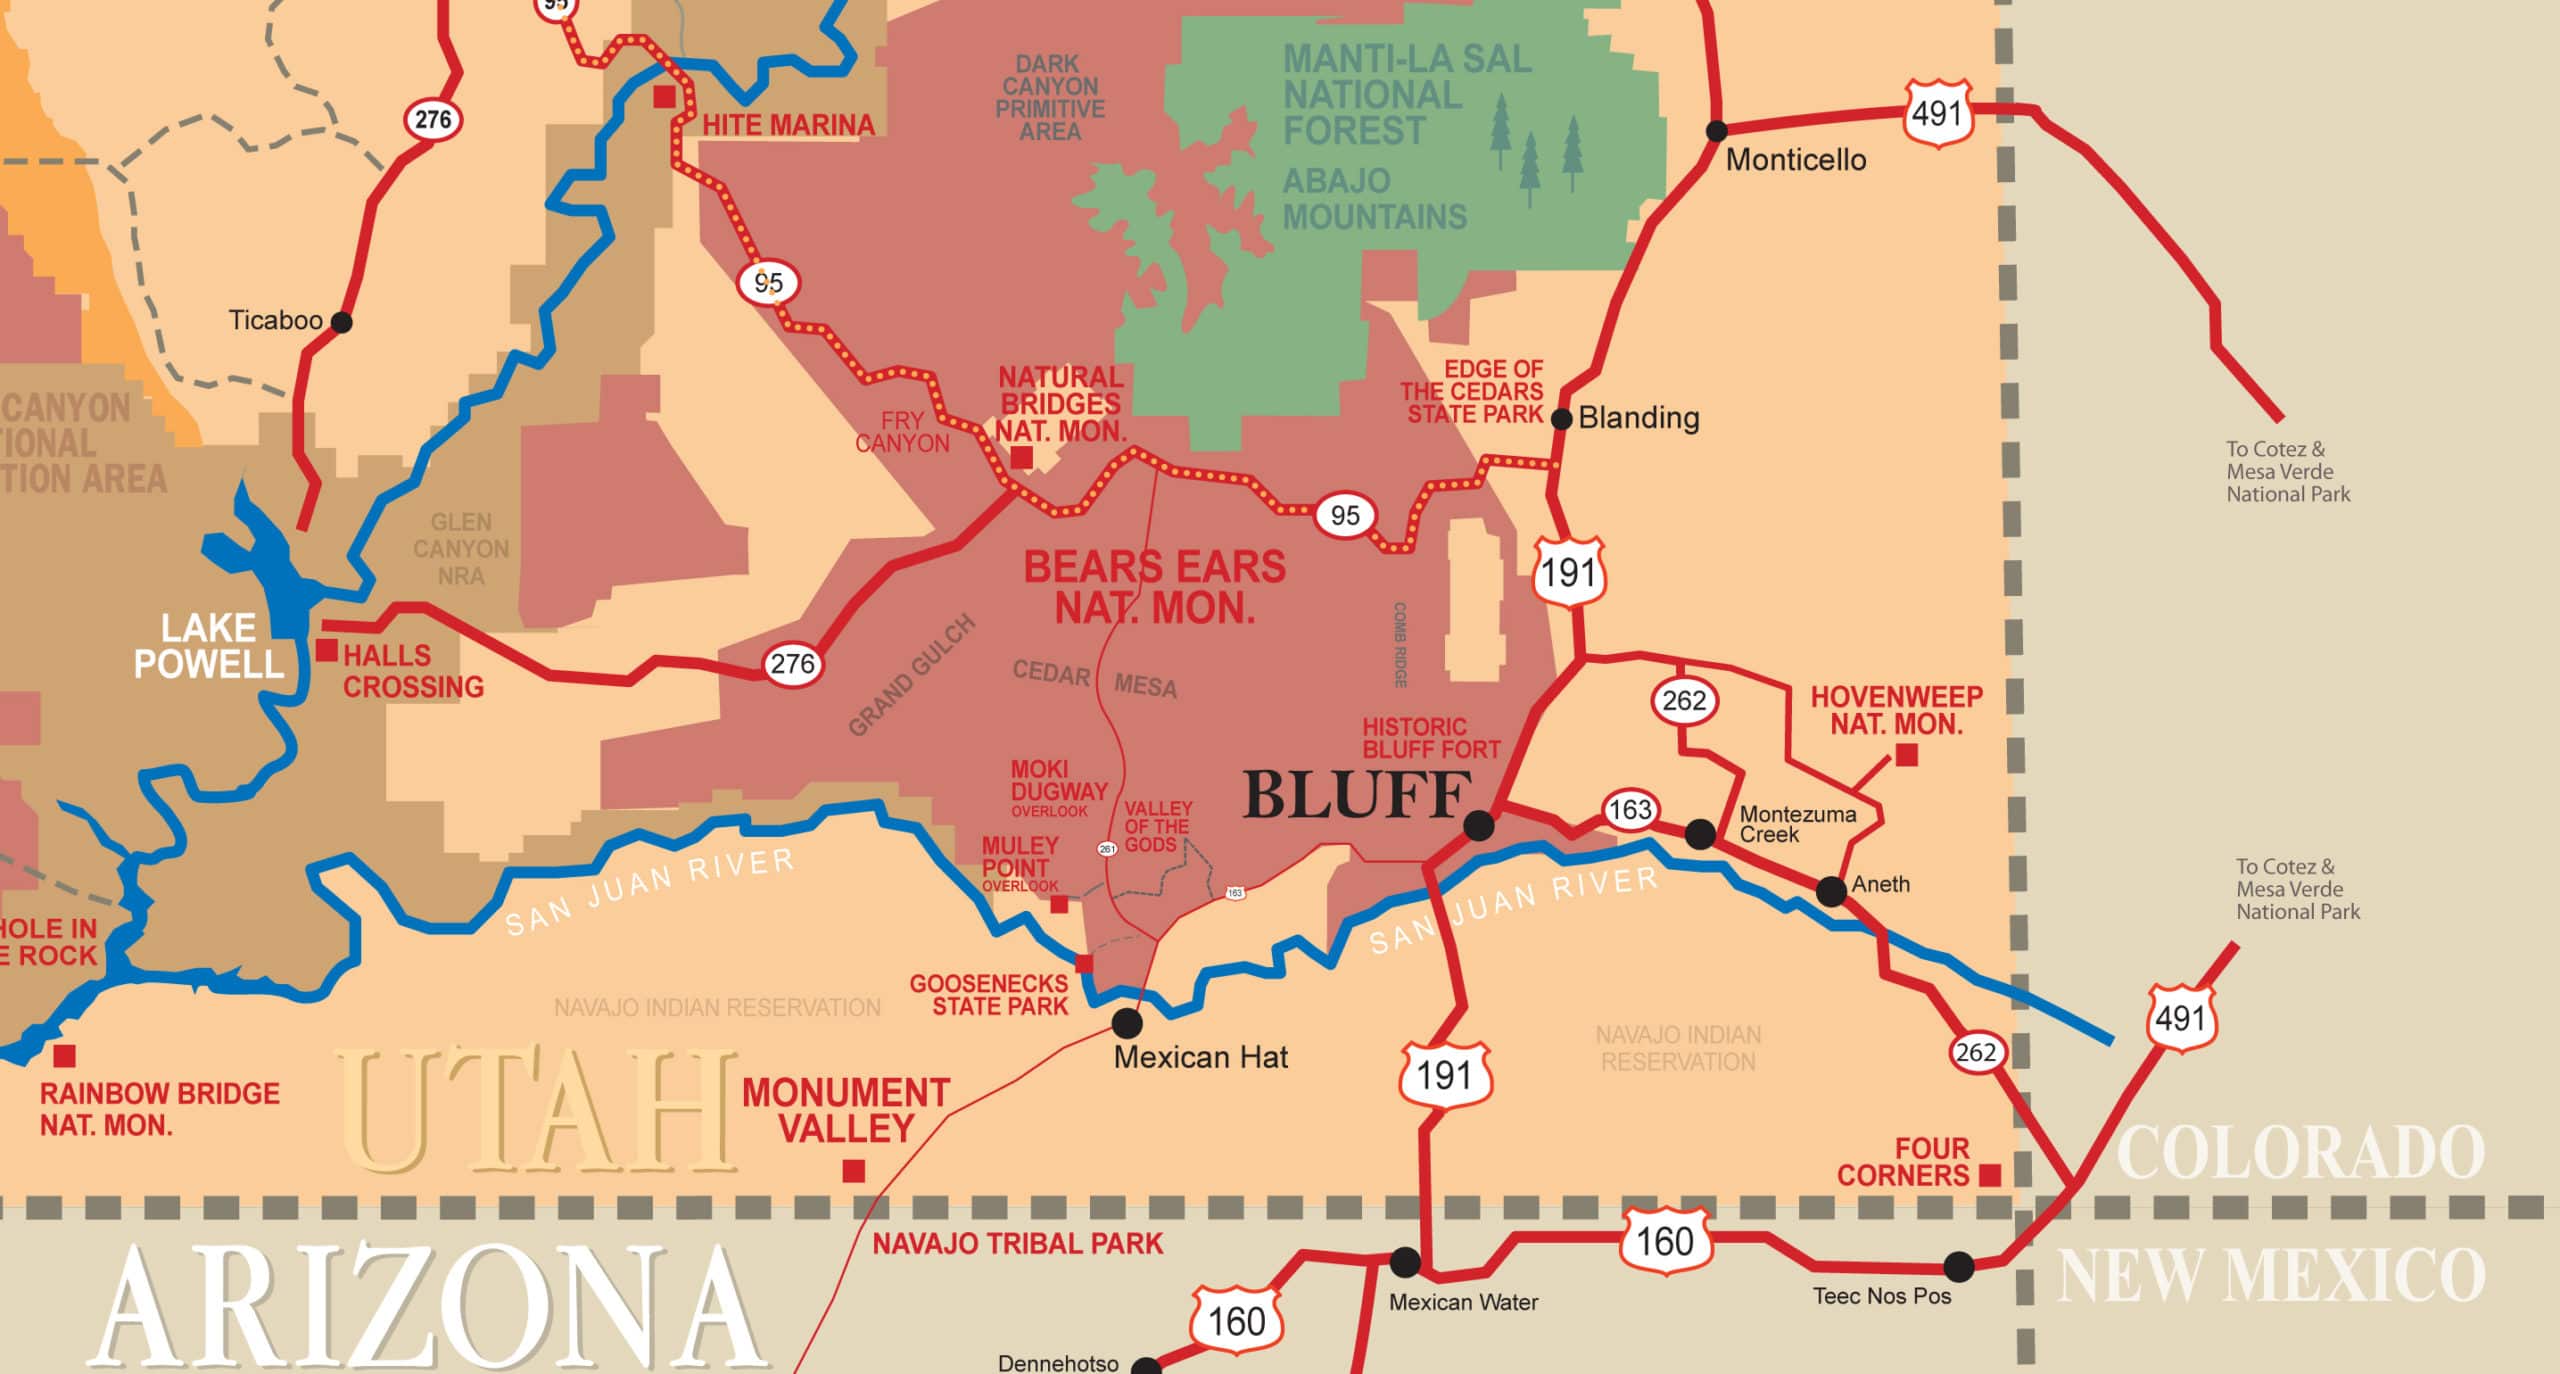 Map of area near Bluff Utah showing Bears Ears Nat Monument